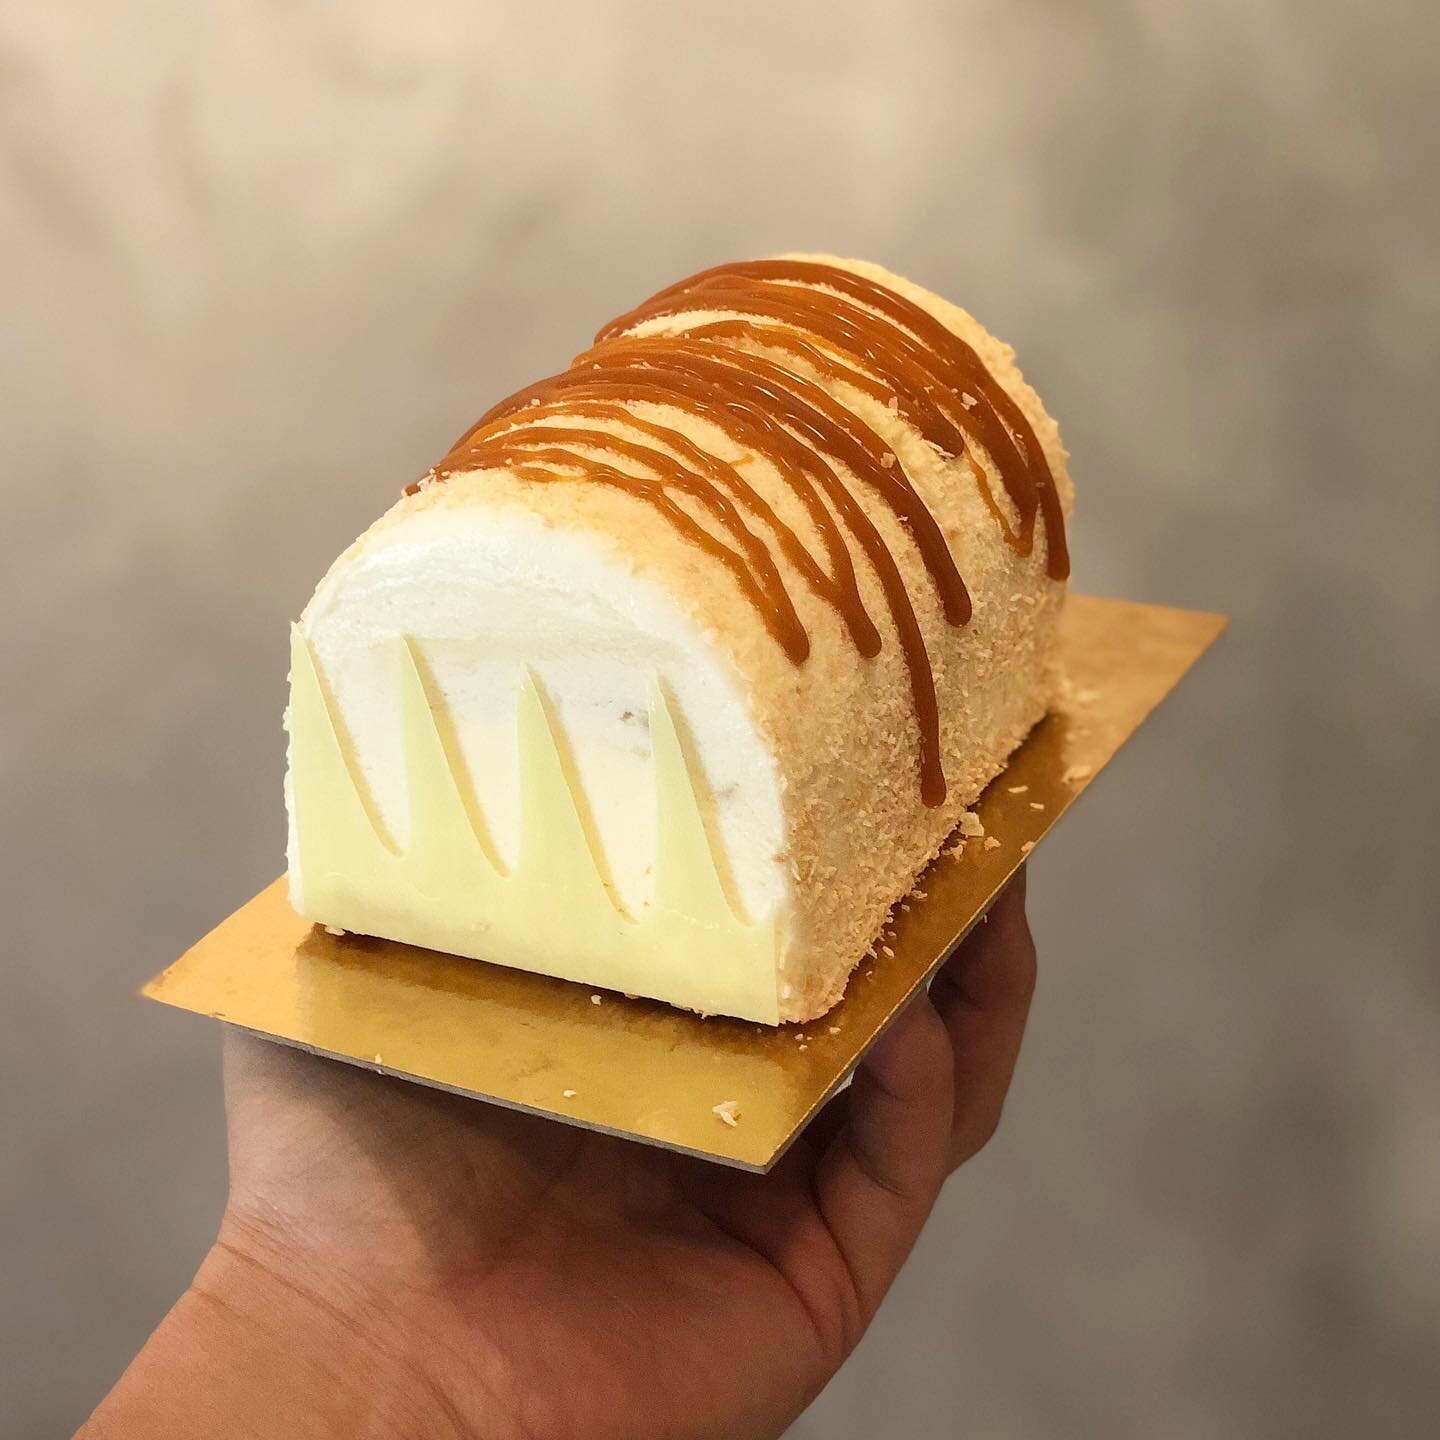 We have a bunch of new FROZEN DESSERTS to beat the heat!

First up, this coconut semifreddo! It&rsquo;s almost like ice cream!!! You can take it from our store to your picnic 🧺 and enjoy it cold under the sun! Keep it in a cooler or freezer if you a